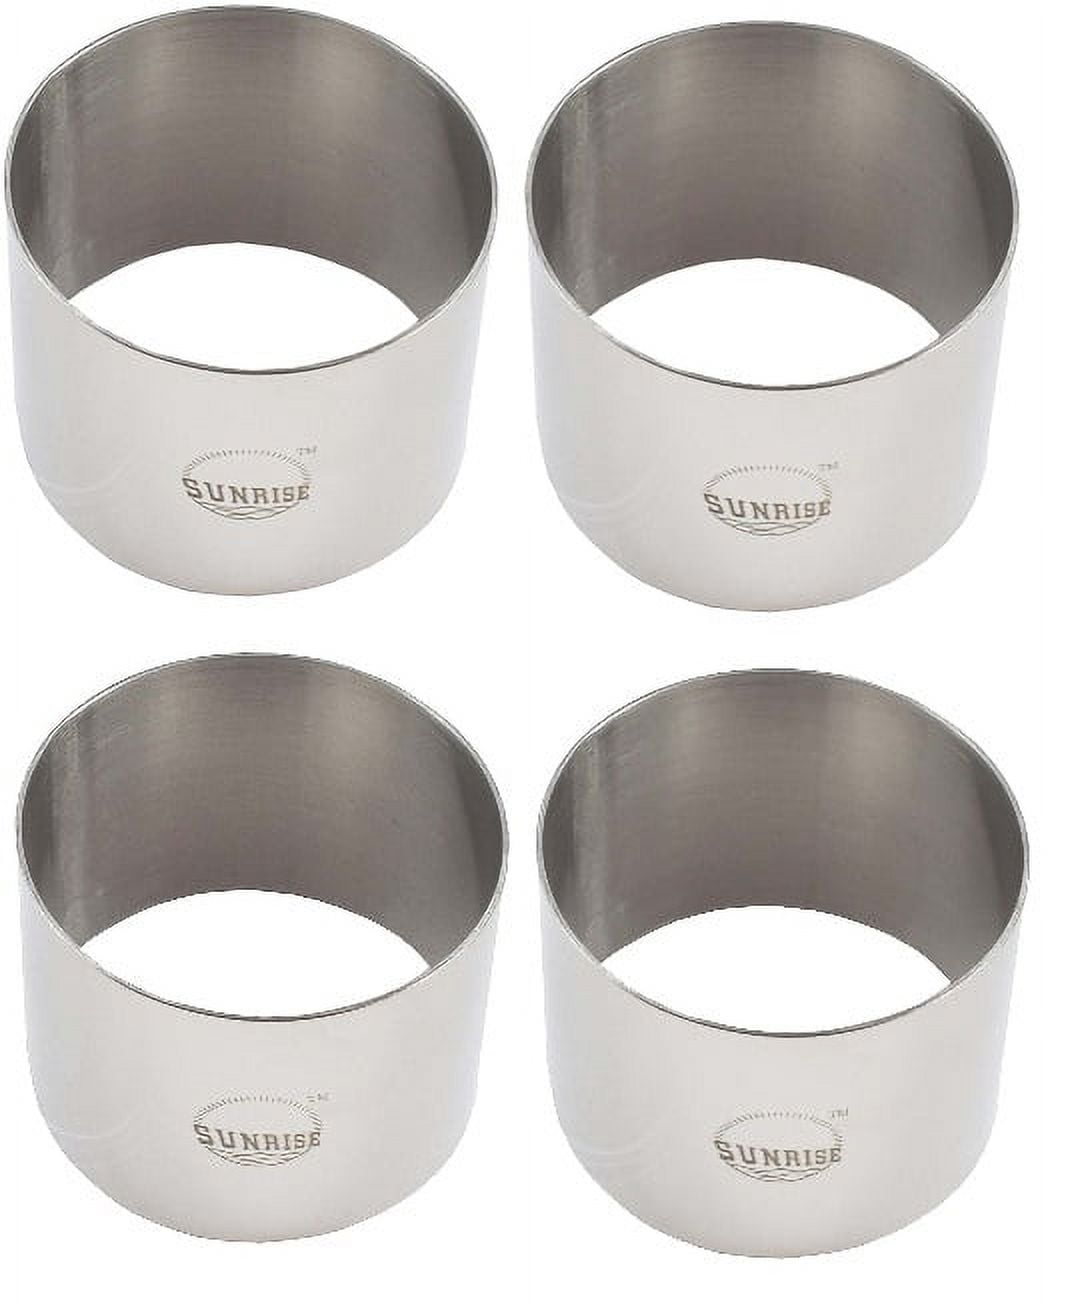 Sunrise Plating Forms Stainless Steel Ring Mold Sets (4 Count) (2.75 x 2)